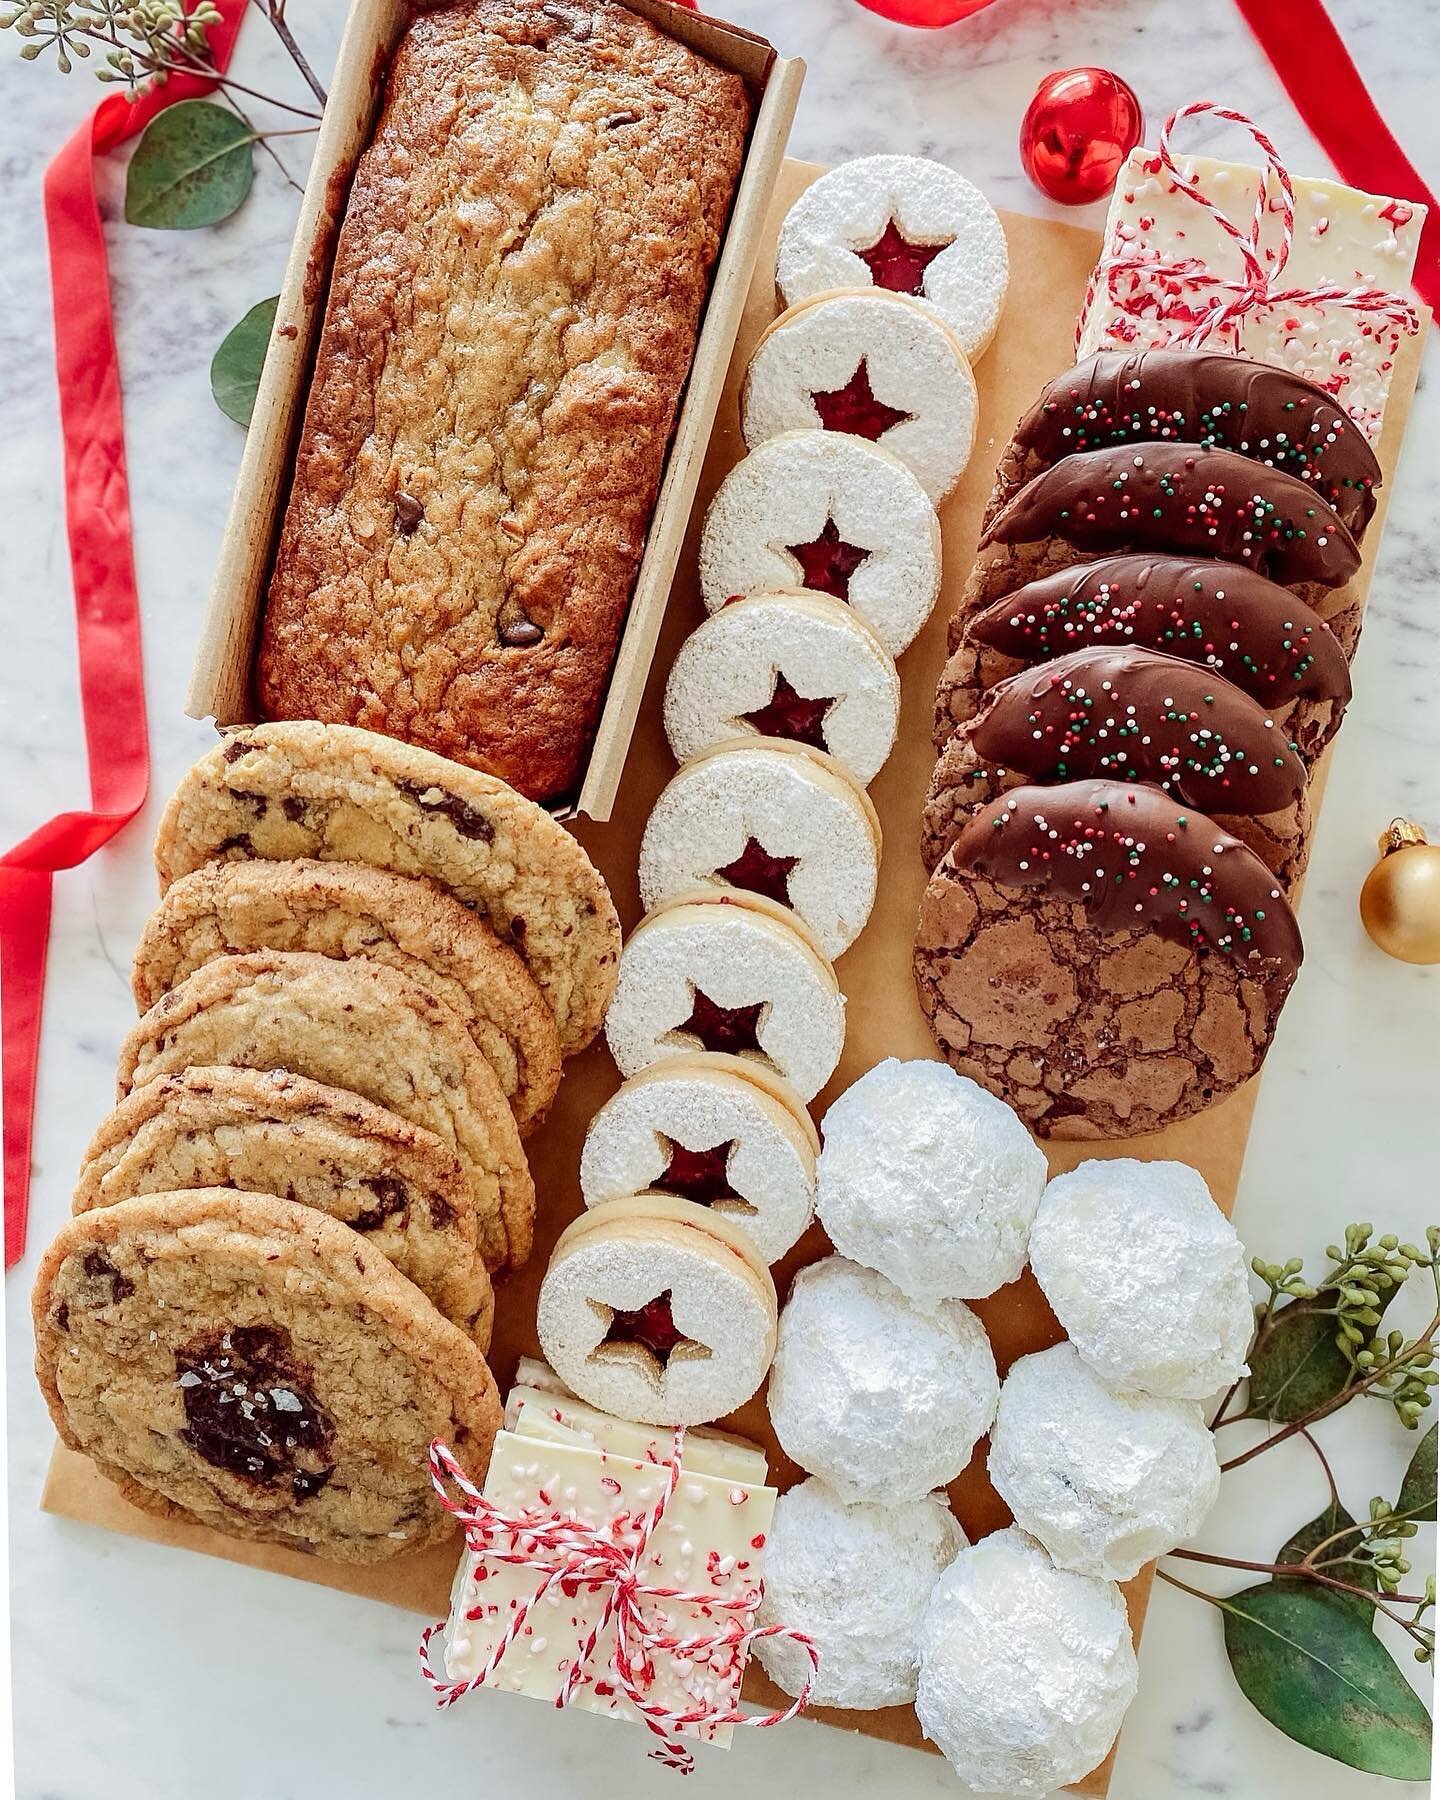 It&rsquo;s holiday cookie time! Who else is baking away in the kitchen?! You can now skip the baking and order our popular holiday cookie board with 6 different baked goodies in time for Christmas. Visit @theseedca to place your order! 

#holidaycook